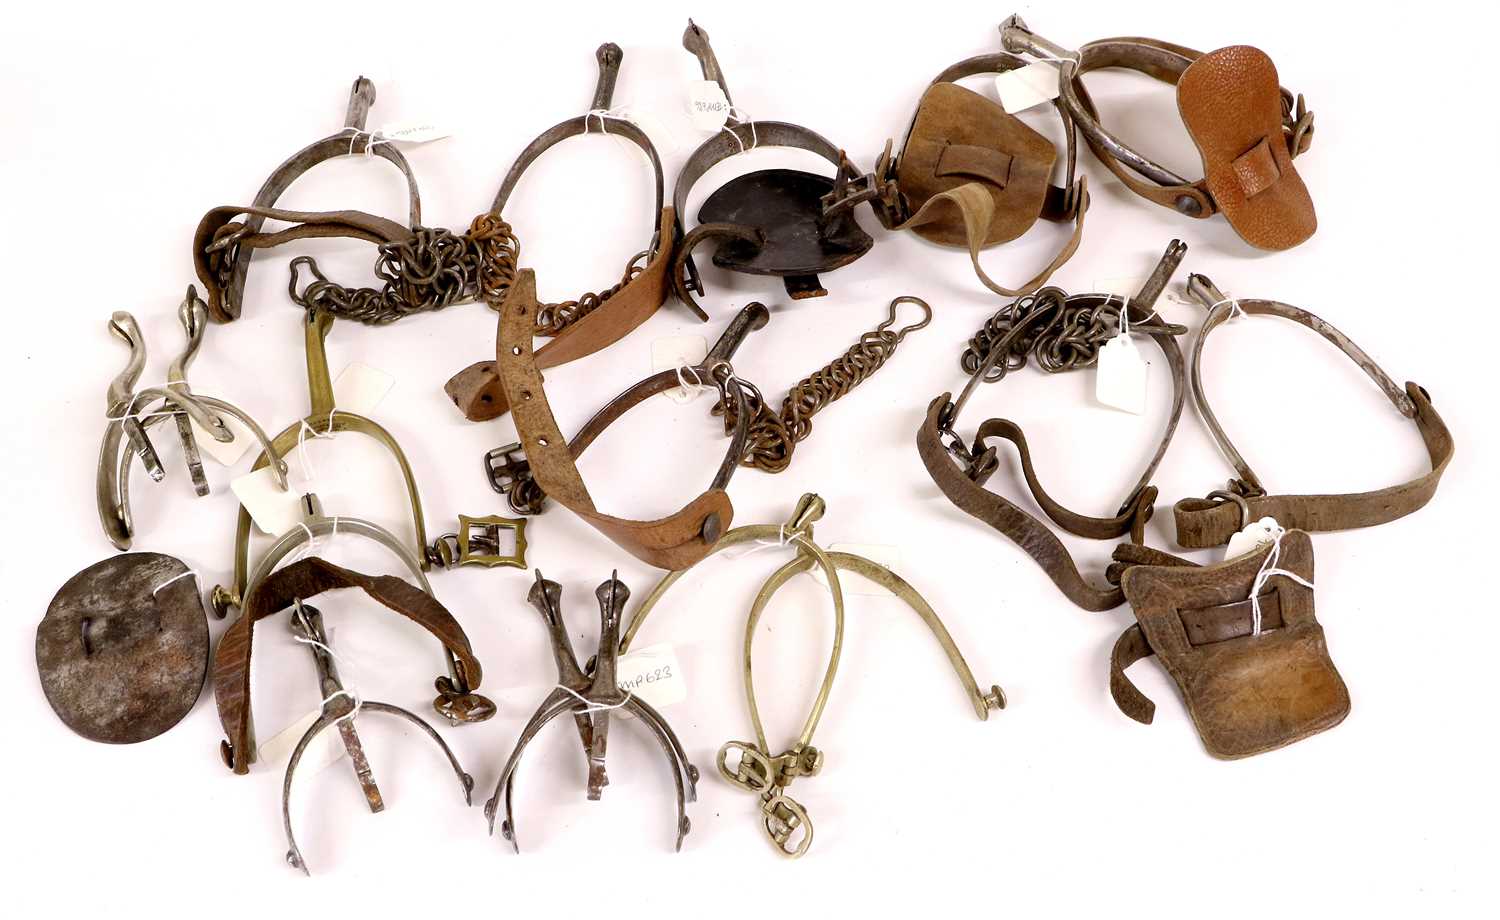 A Quantity of British Uniform Accessories, including Sam Browne belts, sword slings, leather straps, - Image 9 of 11